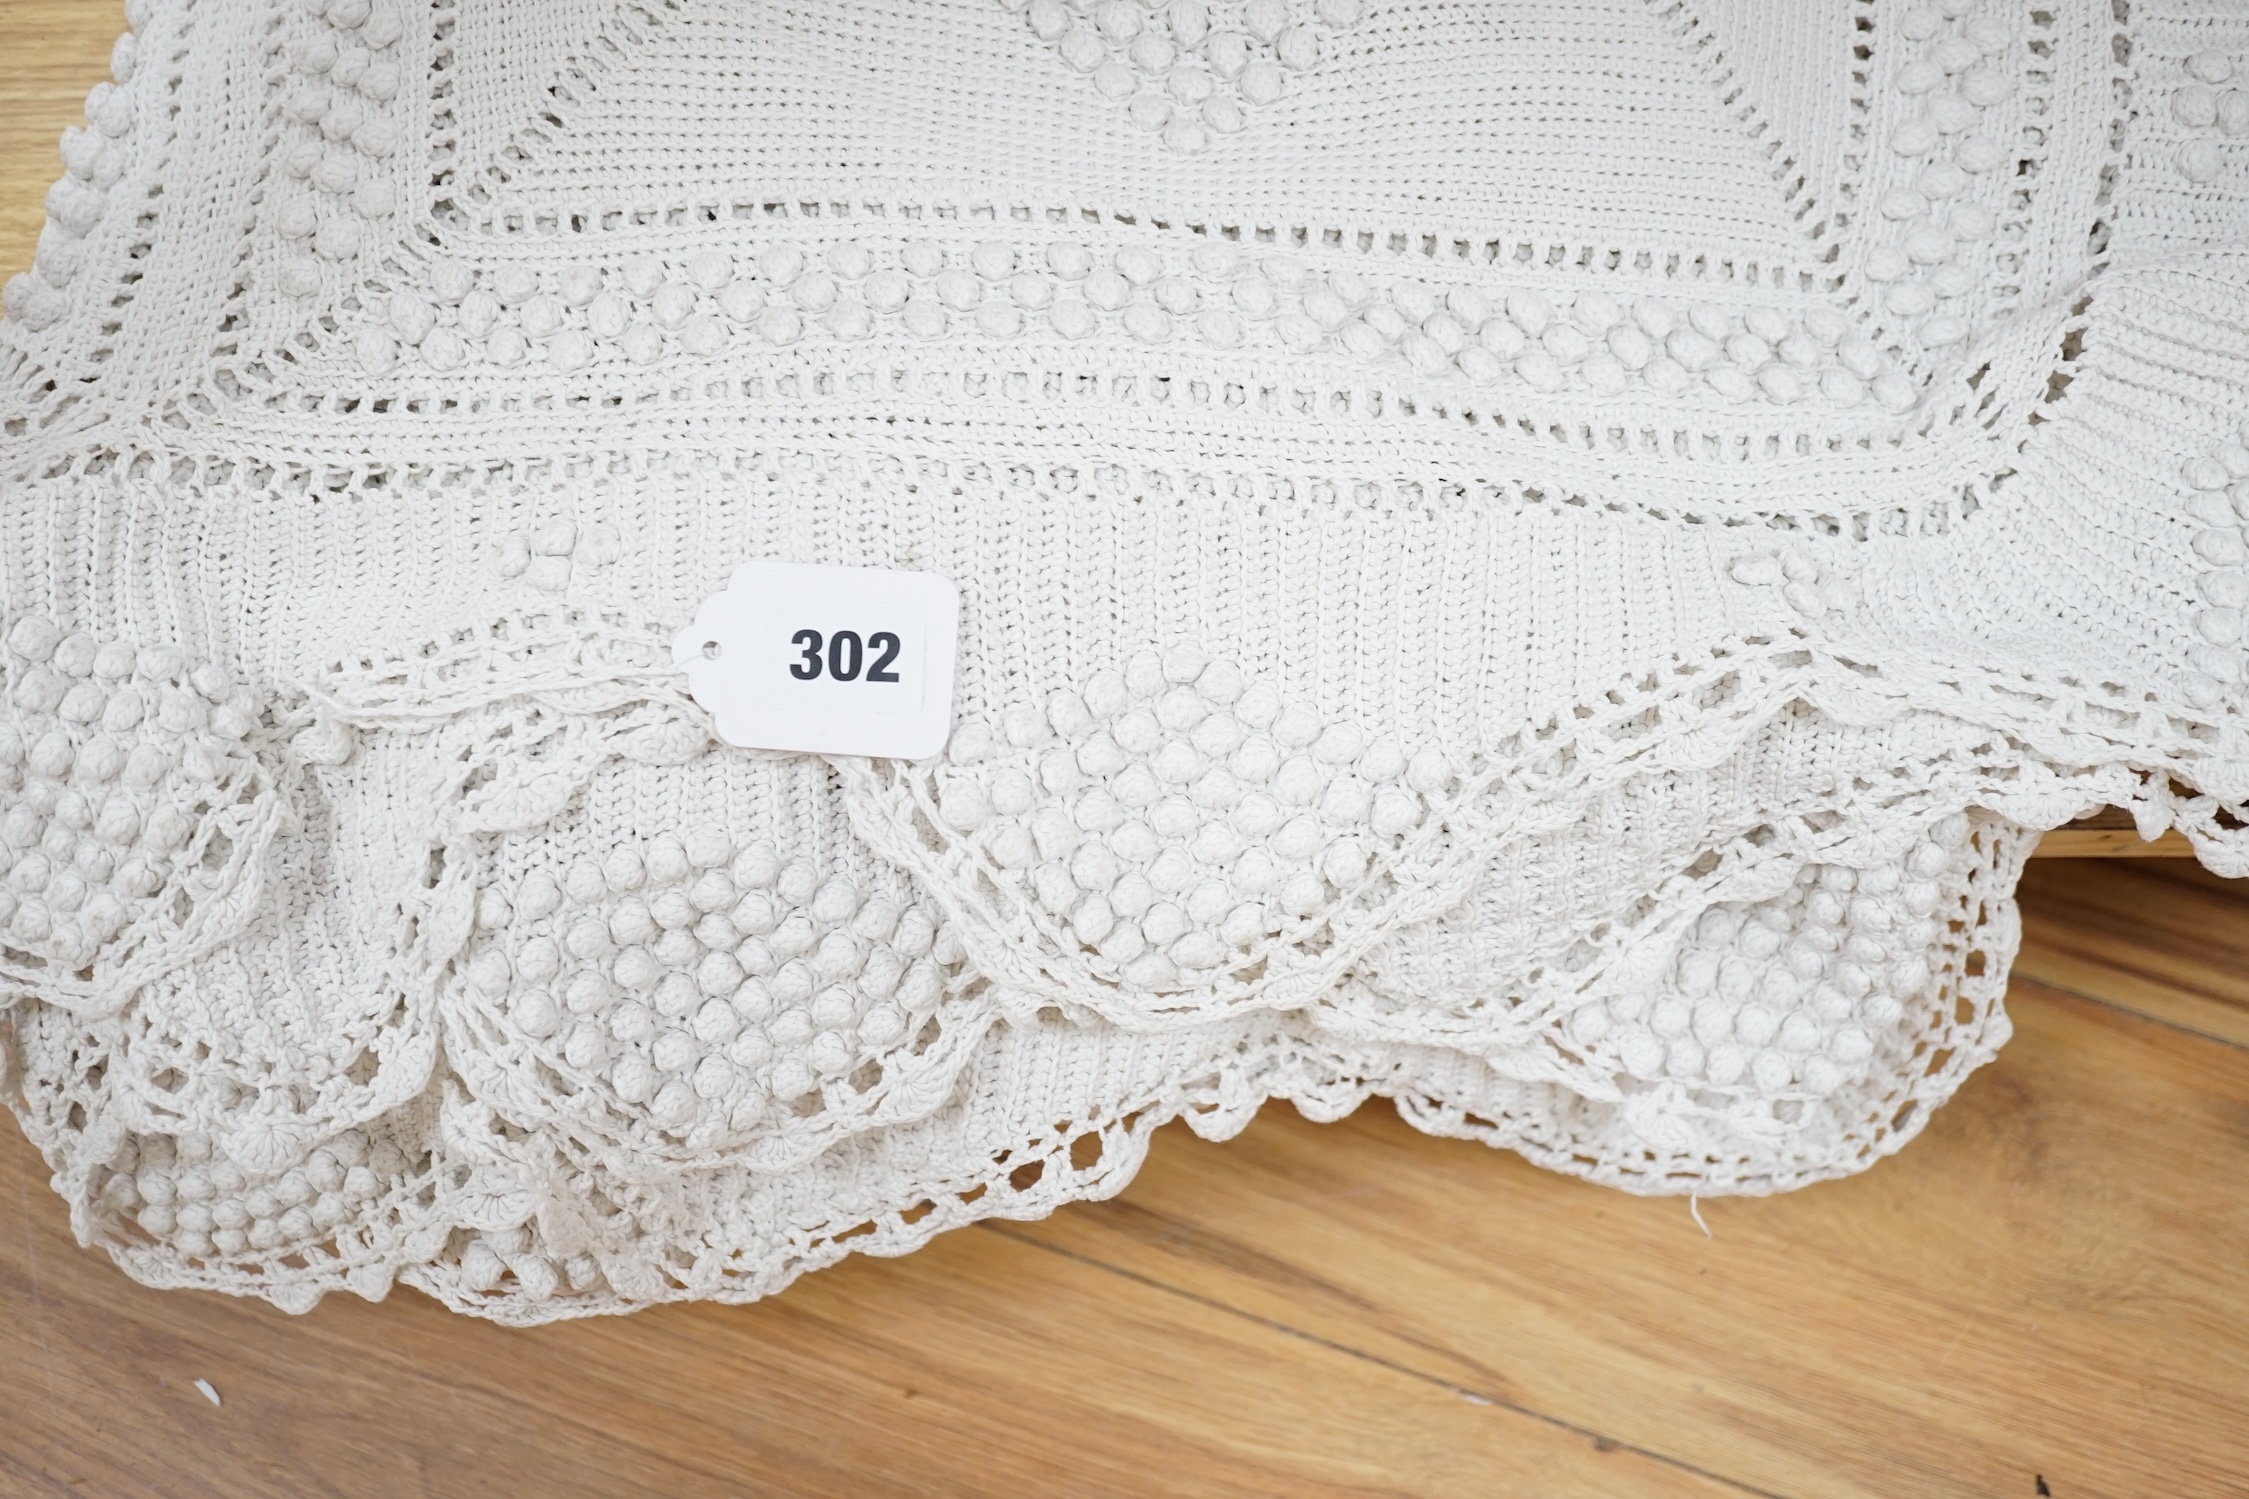 An early 20th century French knitted and crocheted bedcover with bobble motifs, 220cm x 200cm - Image 3 of 4